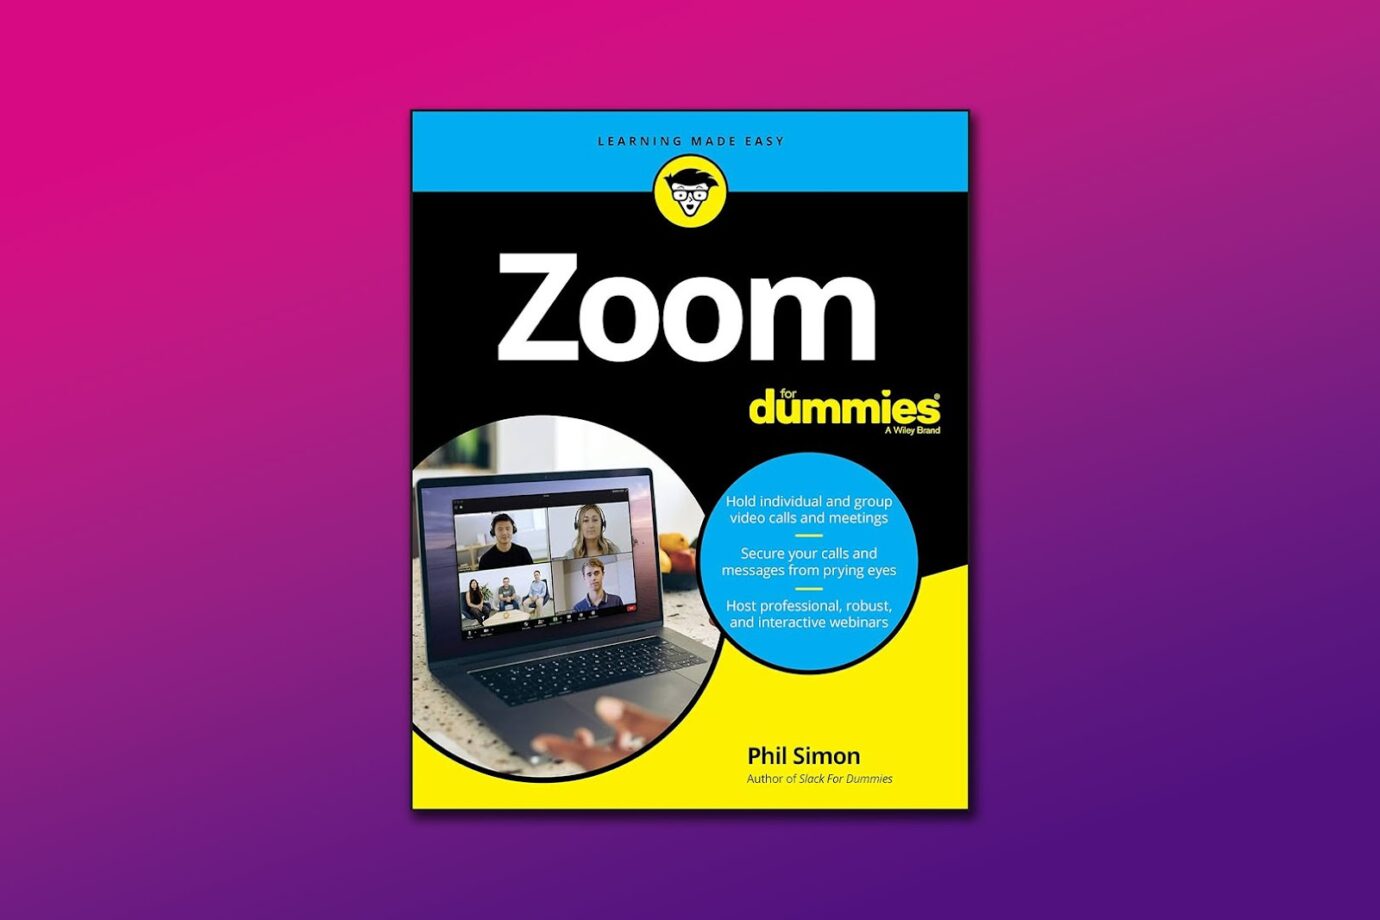 Zoom for Dummies Book on Remote Work